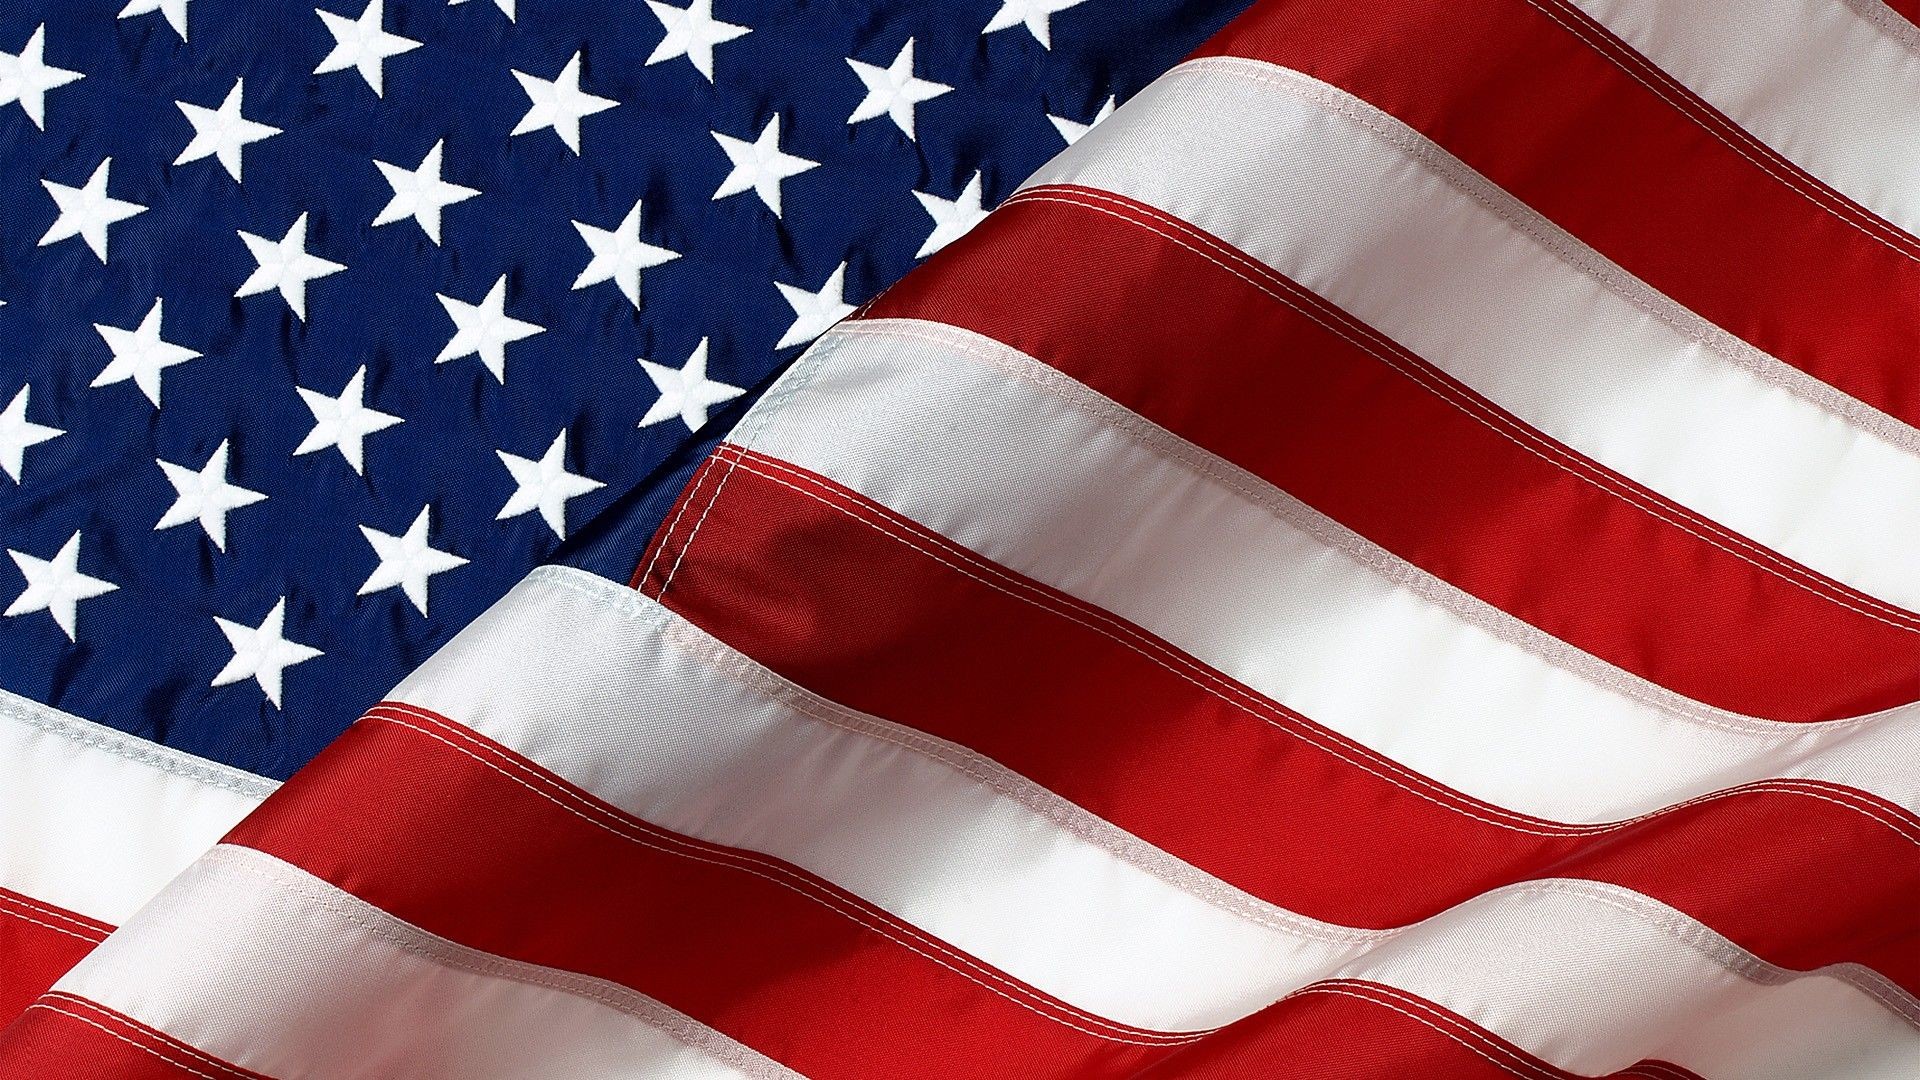 1920x1080 American flag iphone wallpaper and background